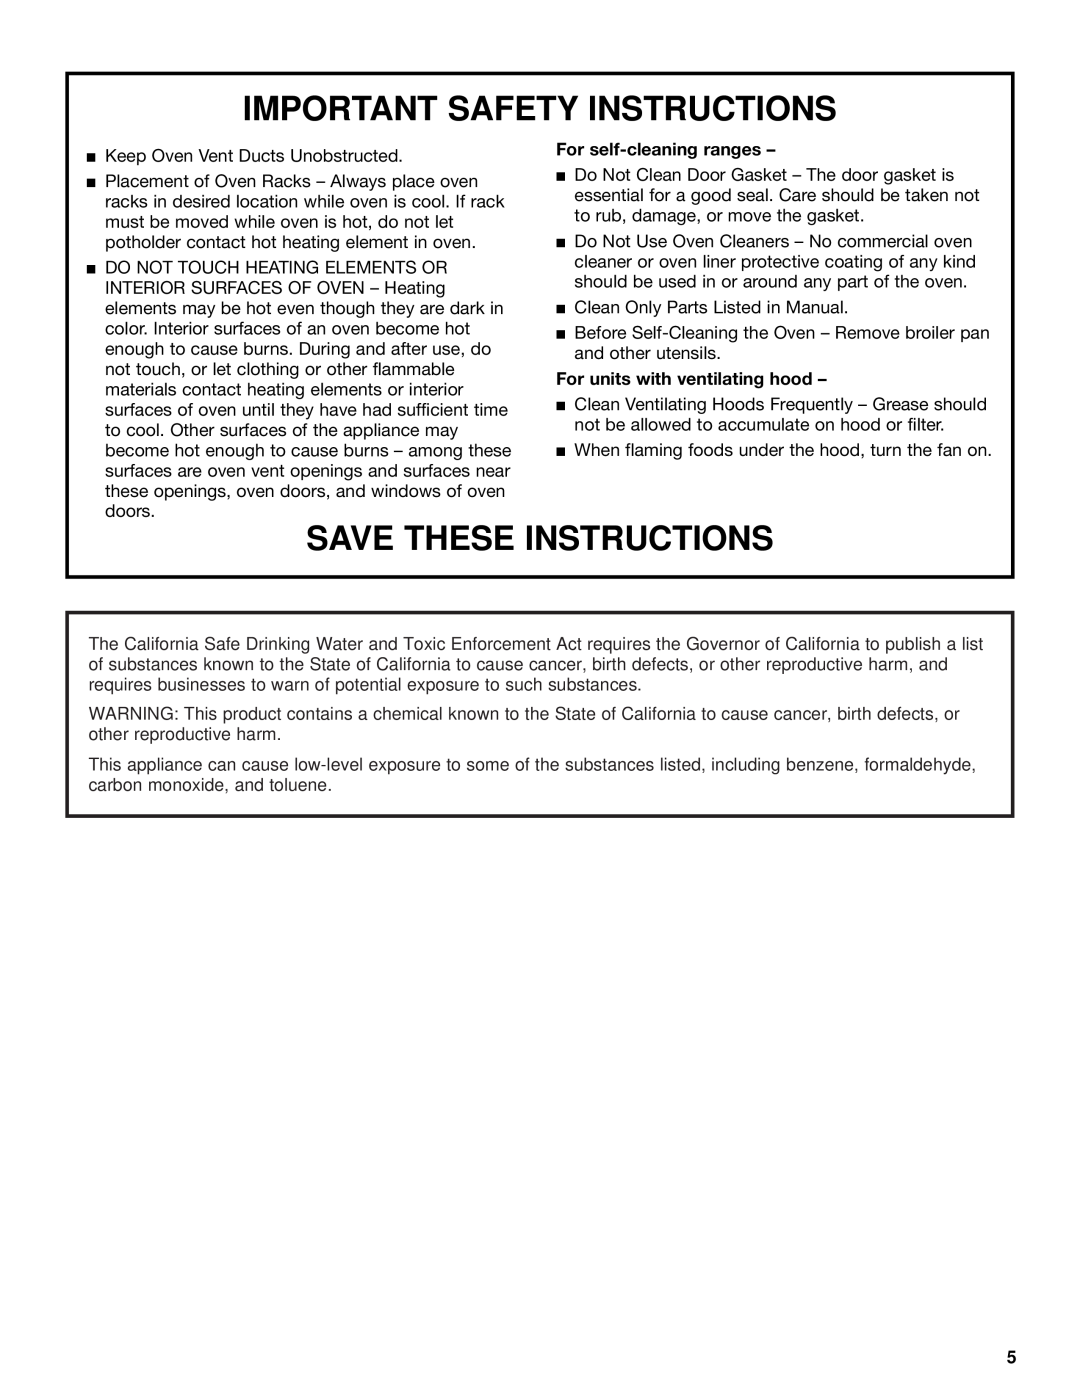 Whirlpool TEP315, TES325, TEP325, TES355 Important Safety Instructions, Save These Instructions, For self-cleaning ranges 